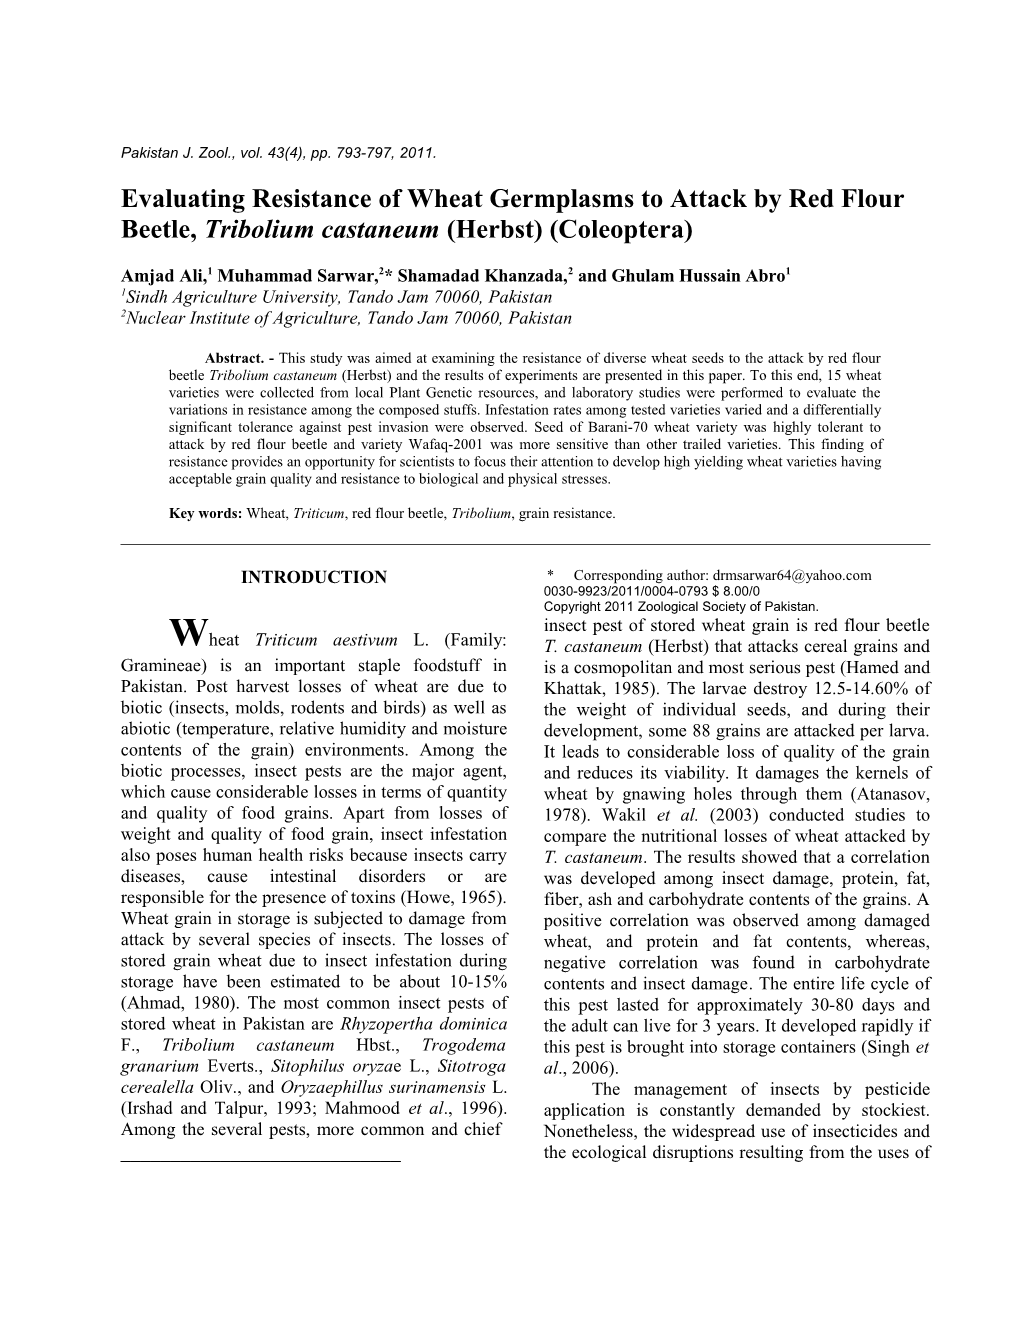 Evaluating Resistance of Wheat Germplasms to Attack by Red Flour Beetle, Tribolium Castaneum